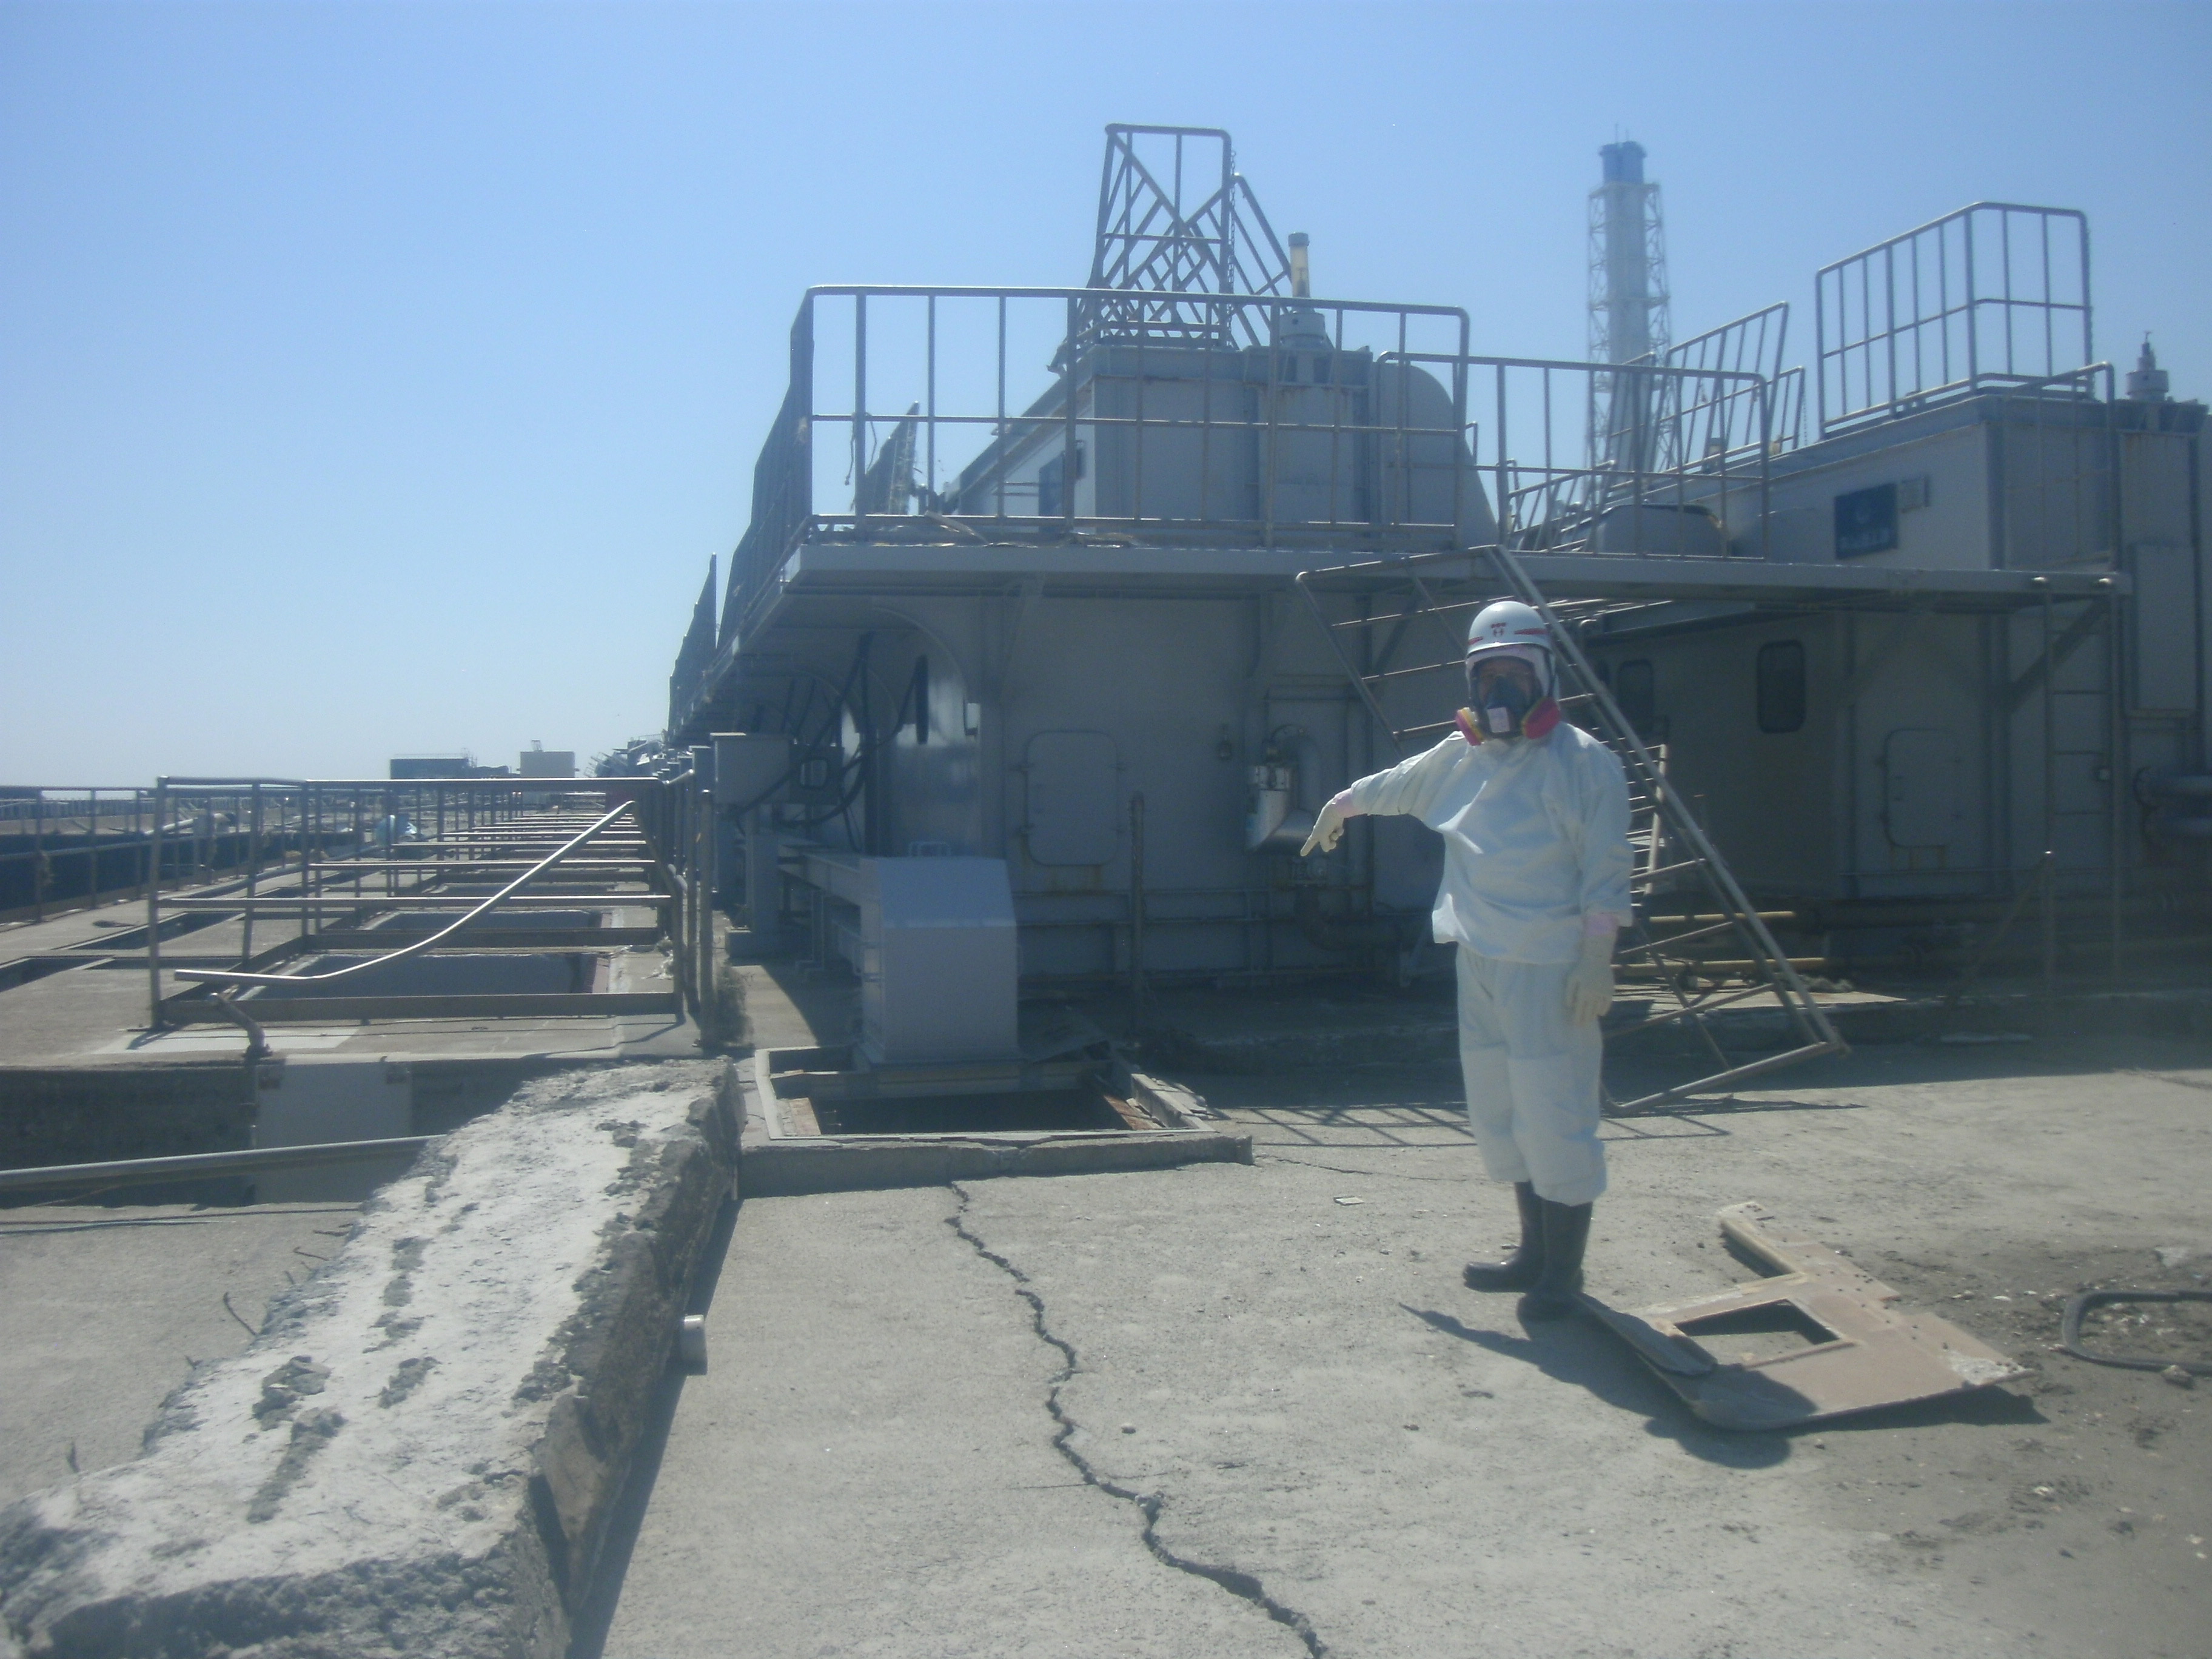 Near of the Sea Water intake of Unit2 in Fukushima Daiichi Nuclear Power Station